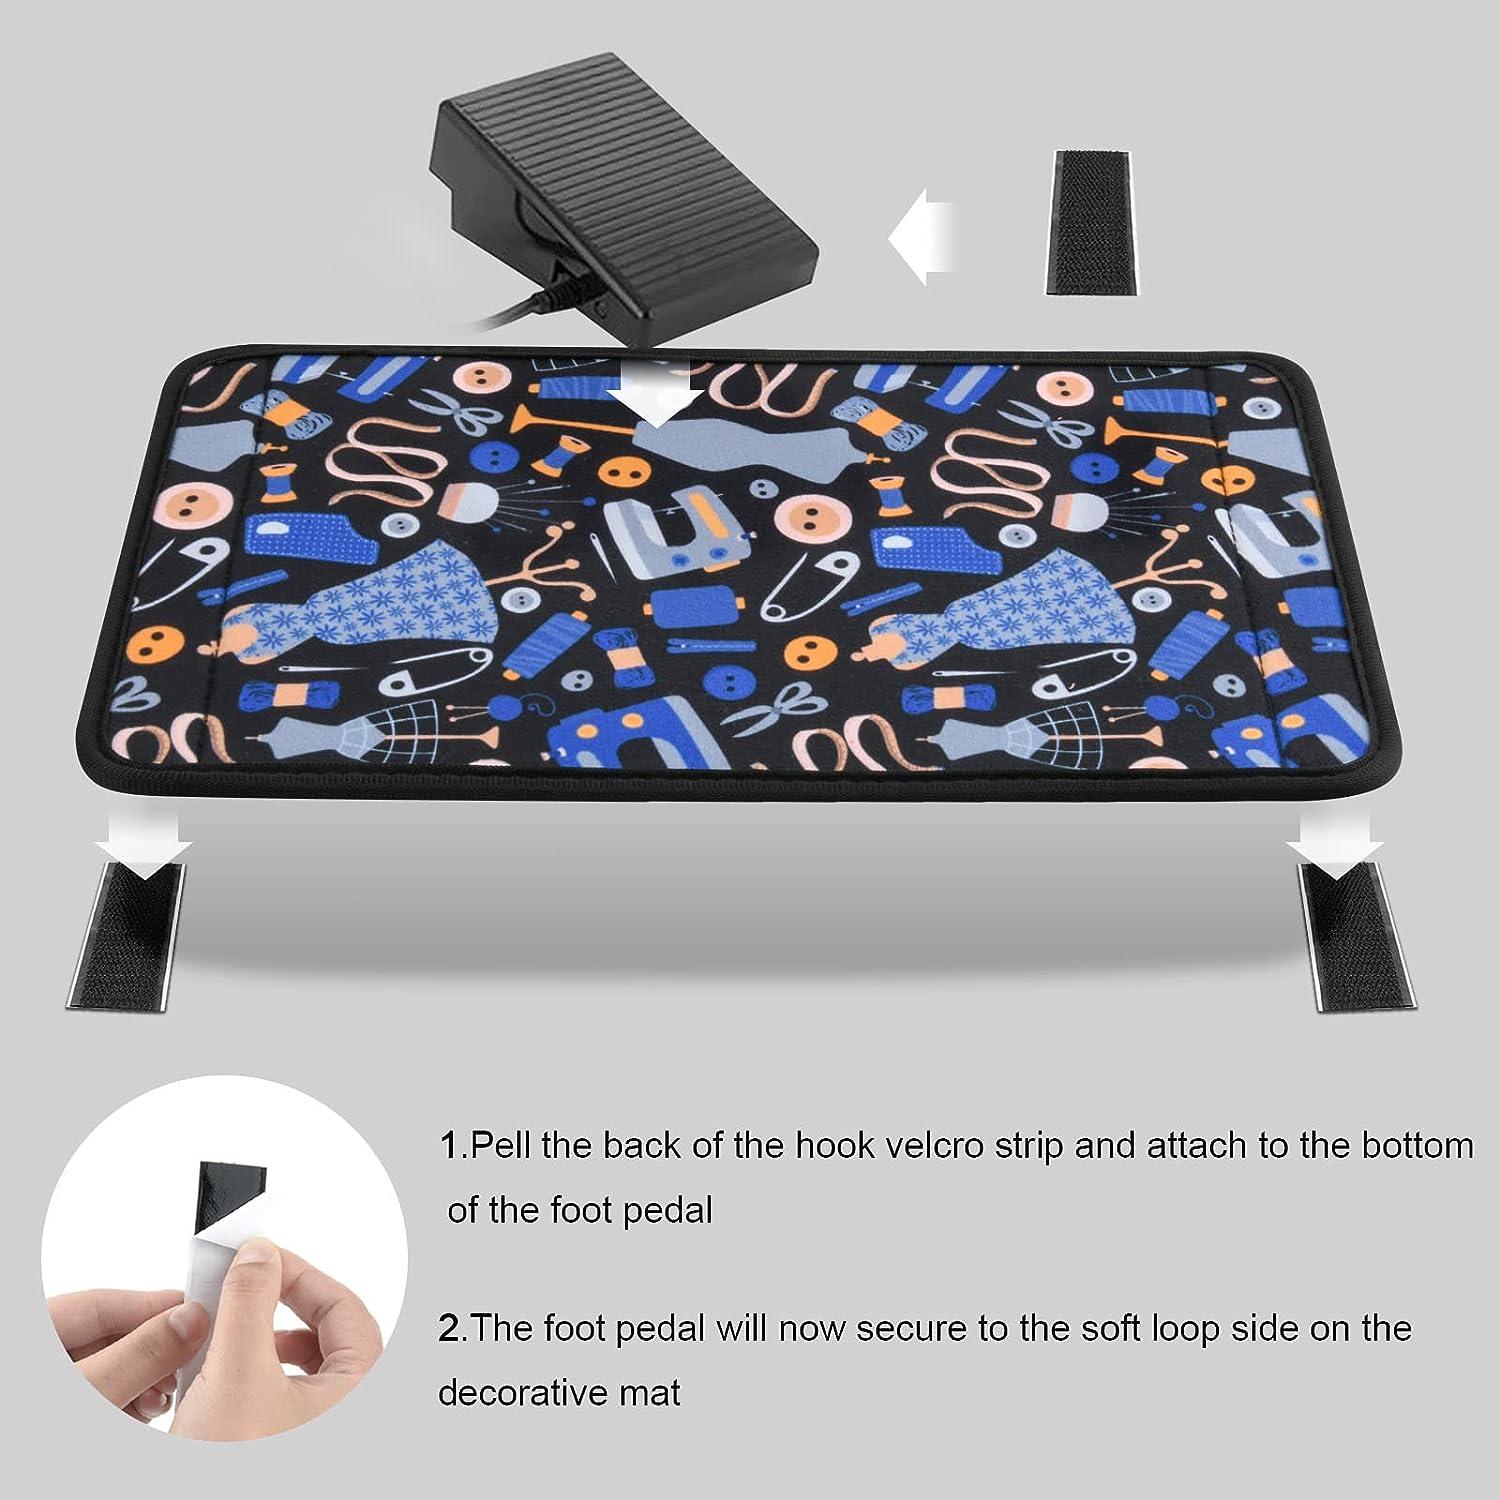  FUIALDOLG Sewing Machine Mat Non Slip Cutting Matts For Sewing  Pad with Pockets for Most Standard Sunflower Cow Sewing Machine Tables :  Arts, Crafts & Sewing